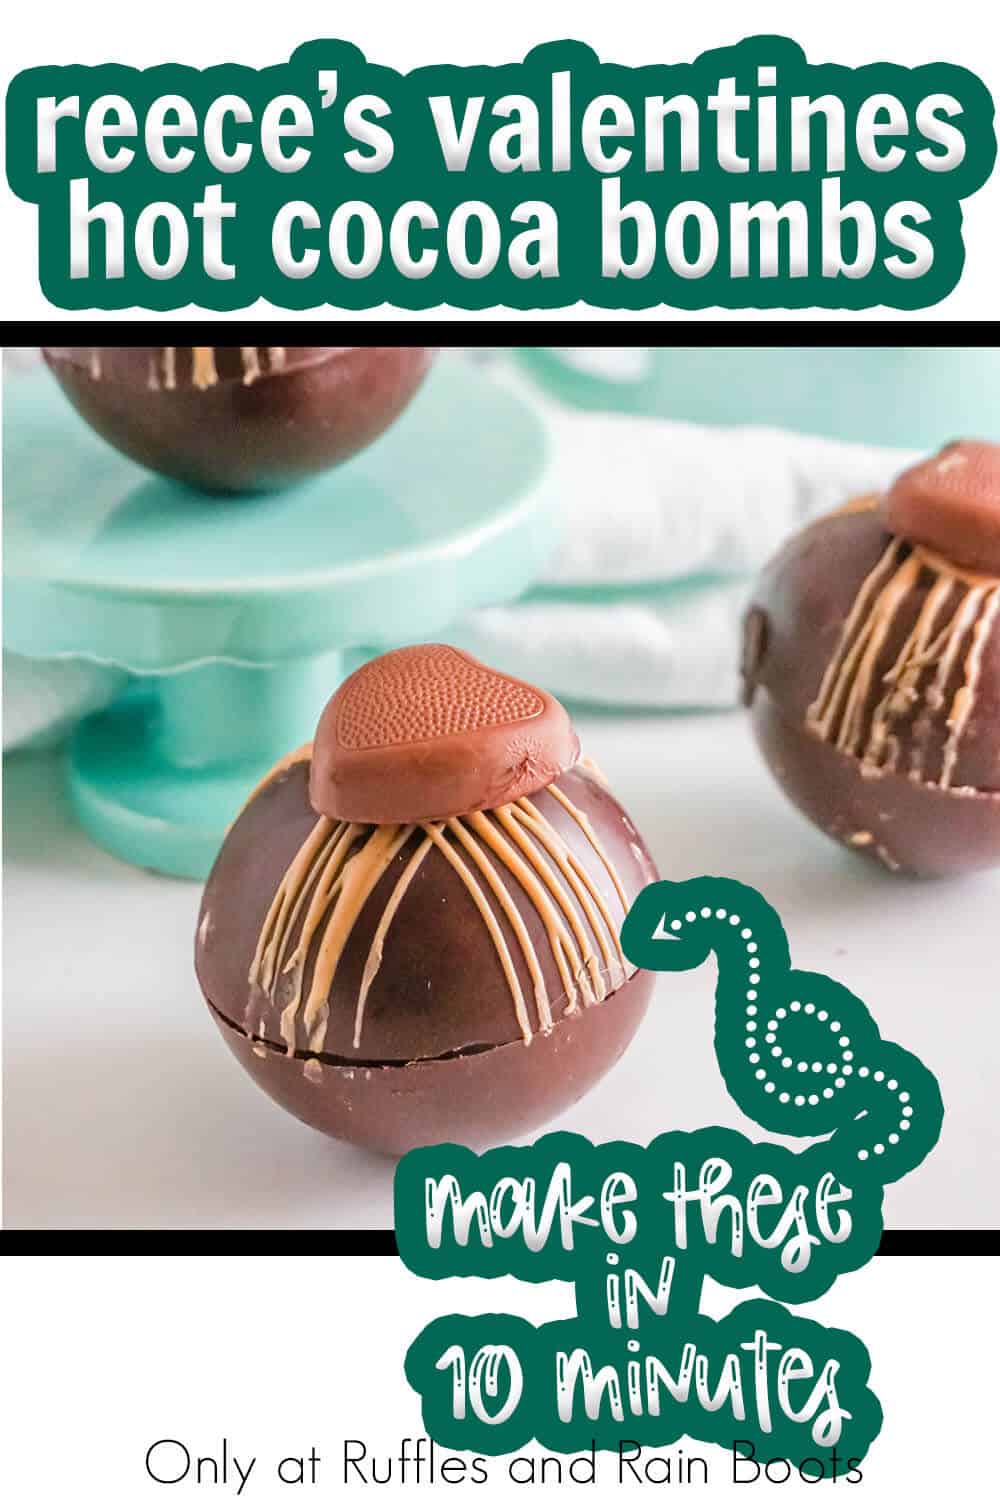 easy hot cocoa bomb recipe for valentines with text which reads reece's valentines hot cocoa bombs make these in 10-minutes